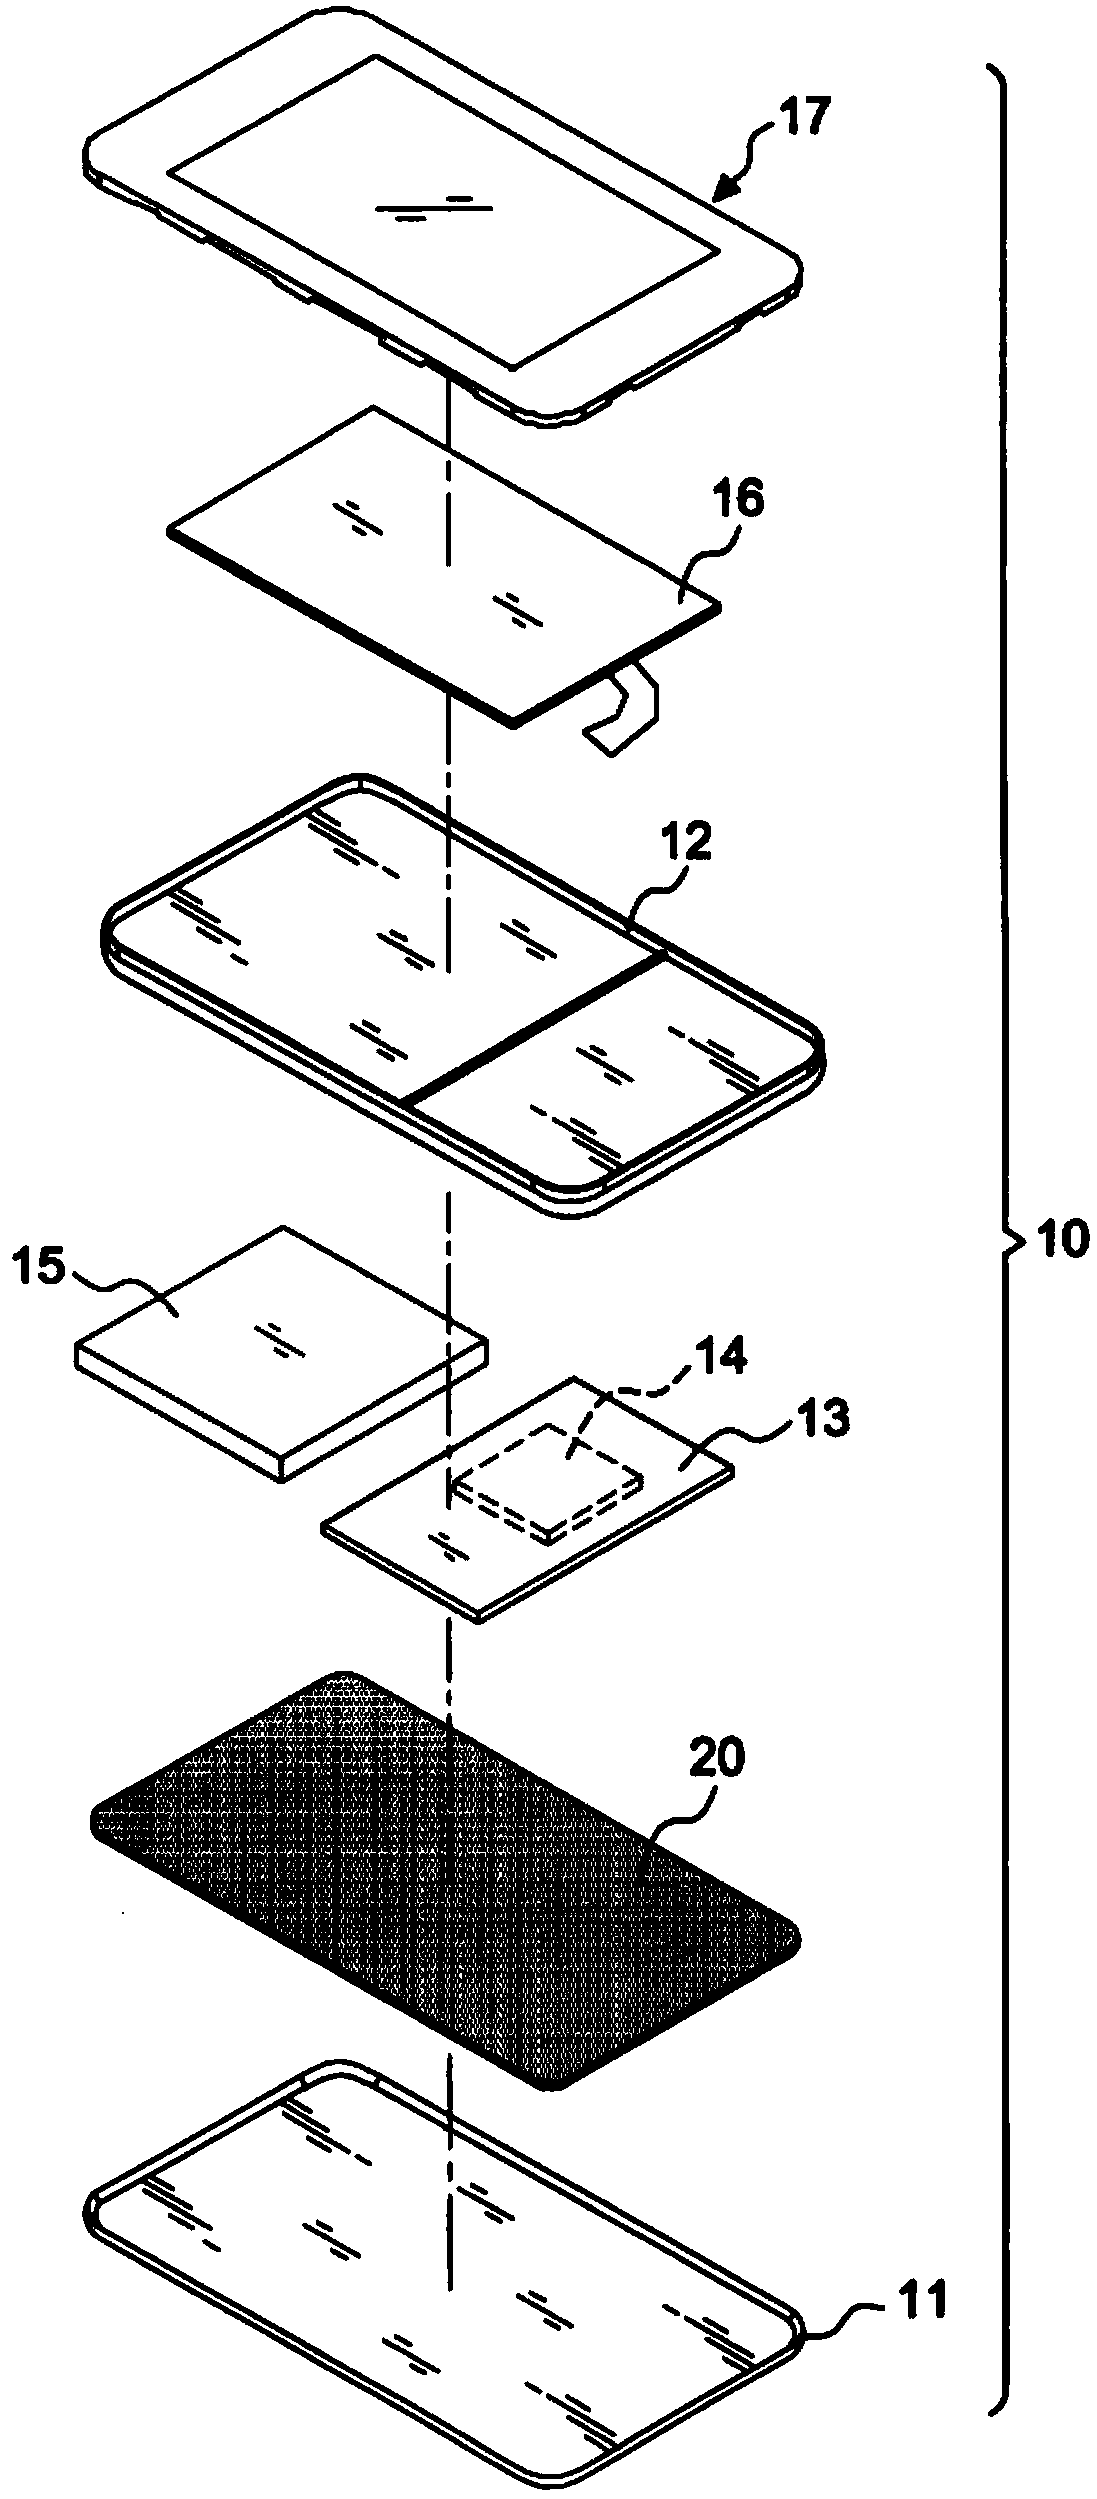 An in-mold injection molding heat dissipation coating structure capable of carrying an electronic device